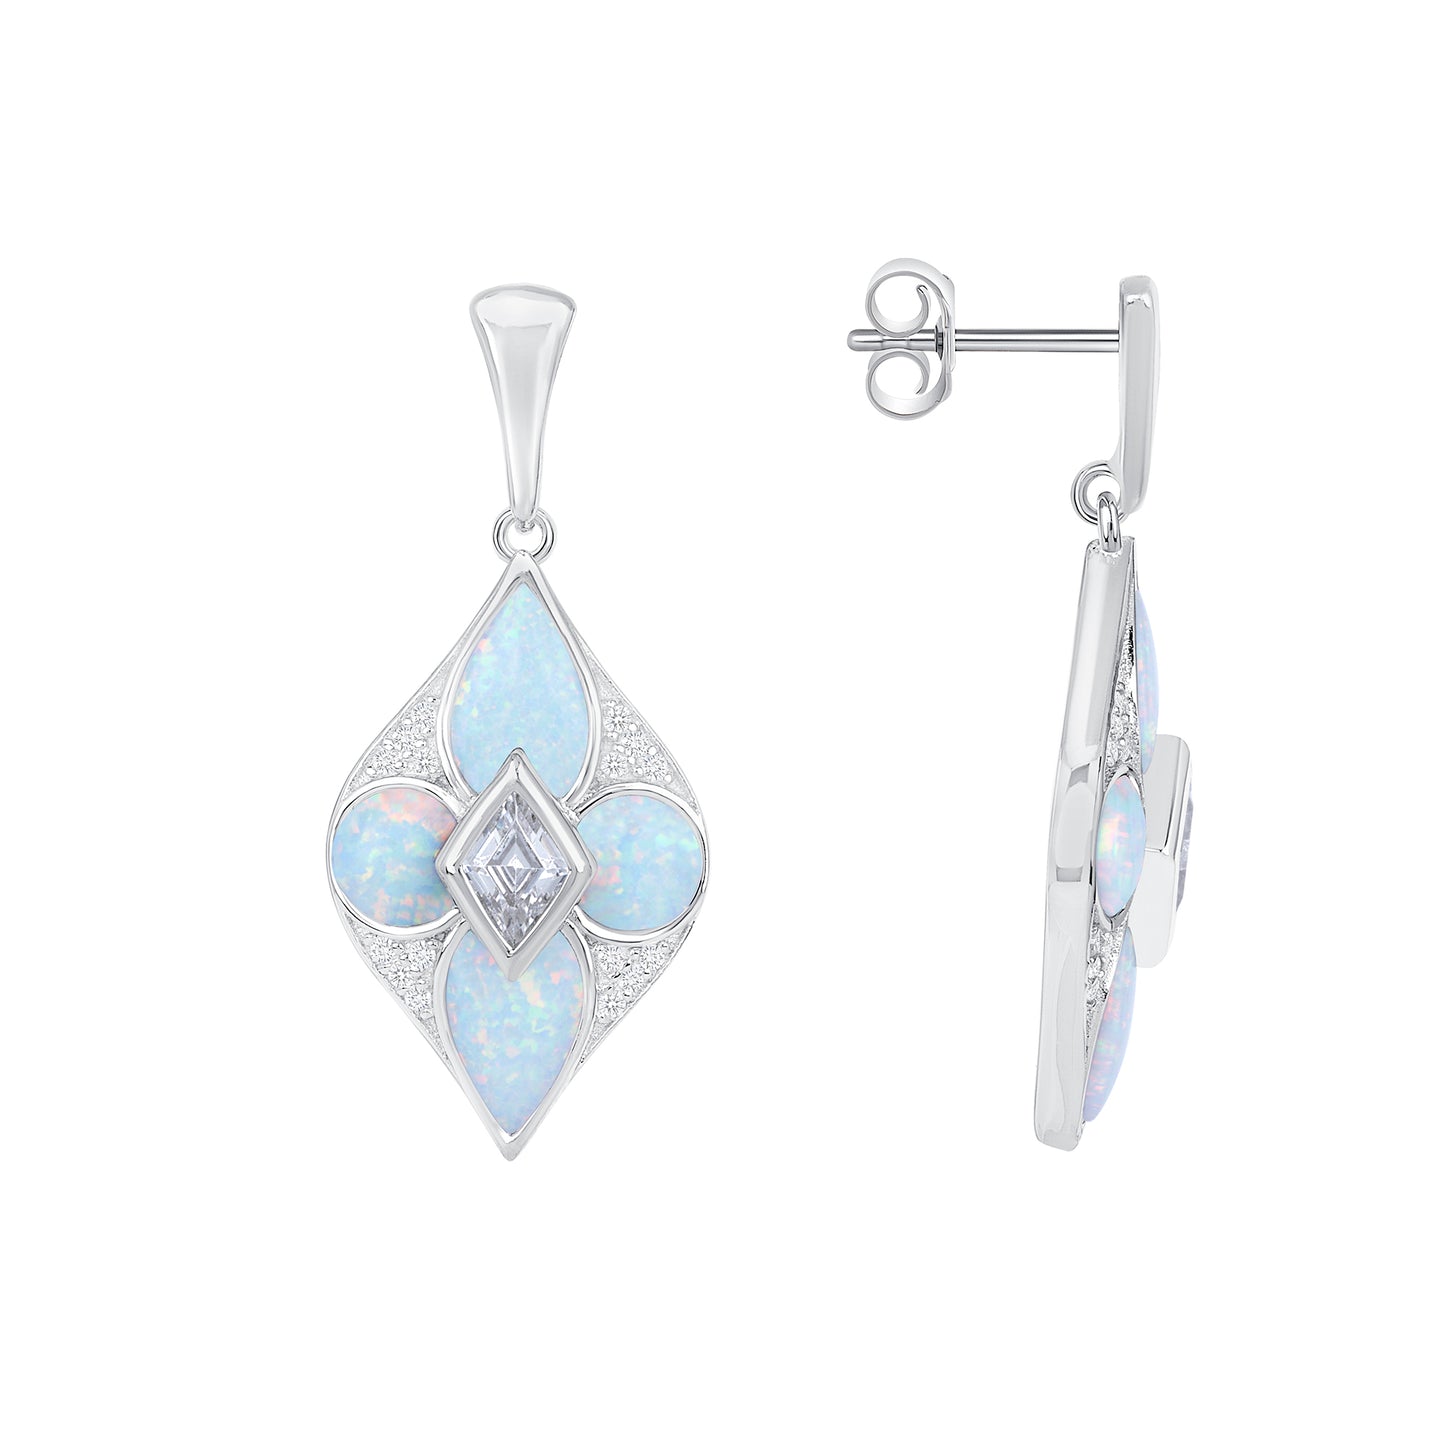 Silver 925 Rhodium Plated Dangling White Opal with Cubic Zirconia Earring. DGE2021